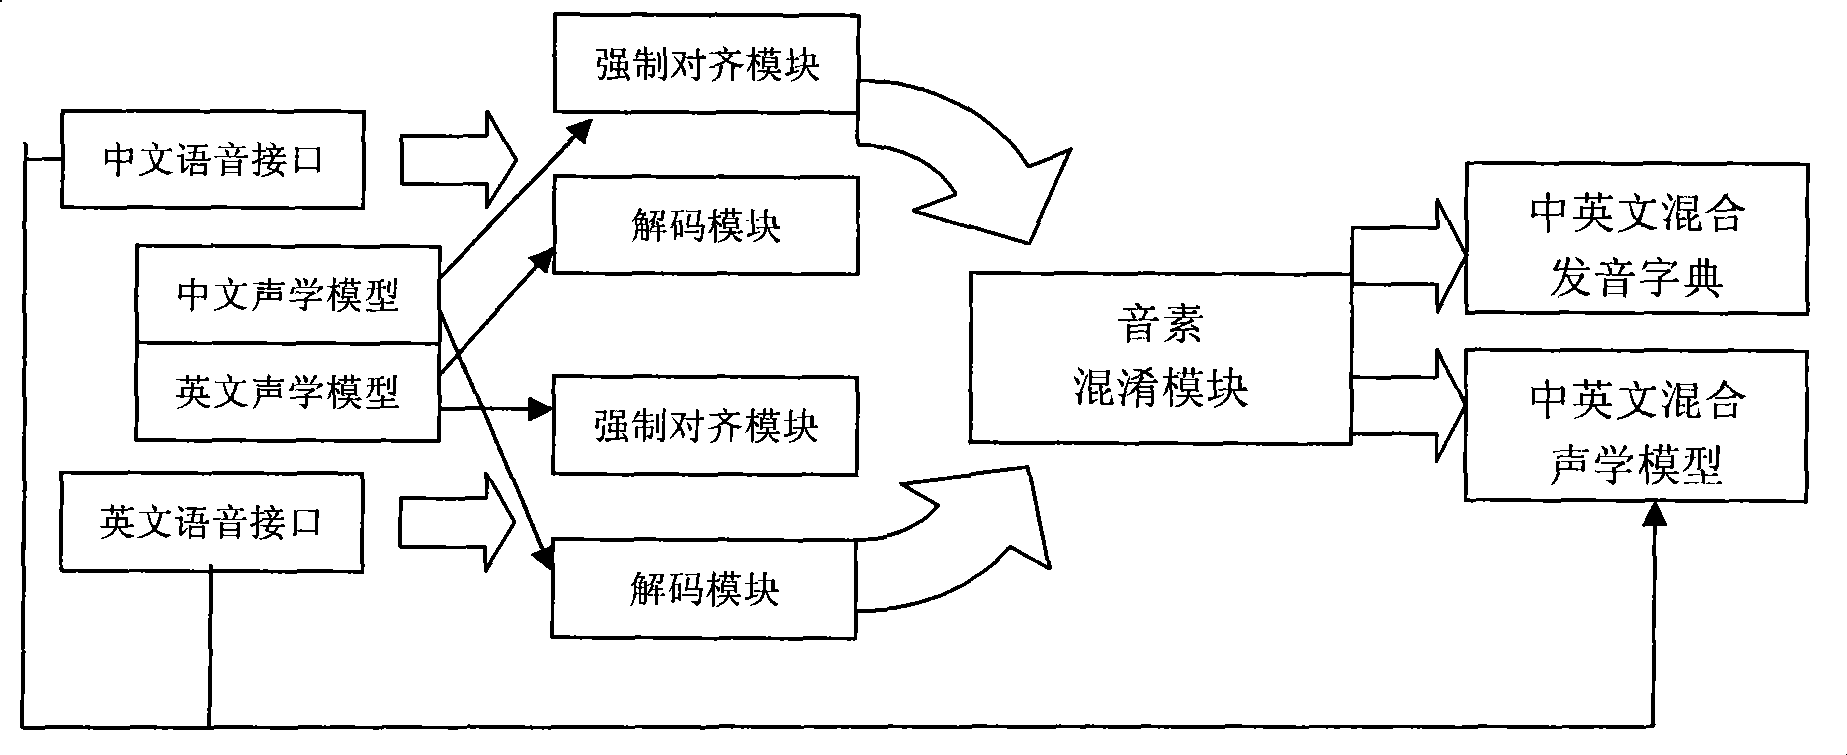 Chinese-English bilingual speech recognition method based on phoneme confusion